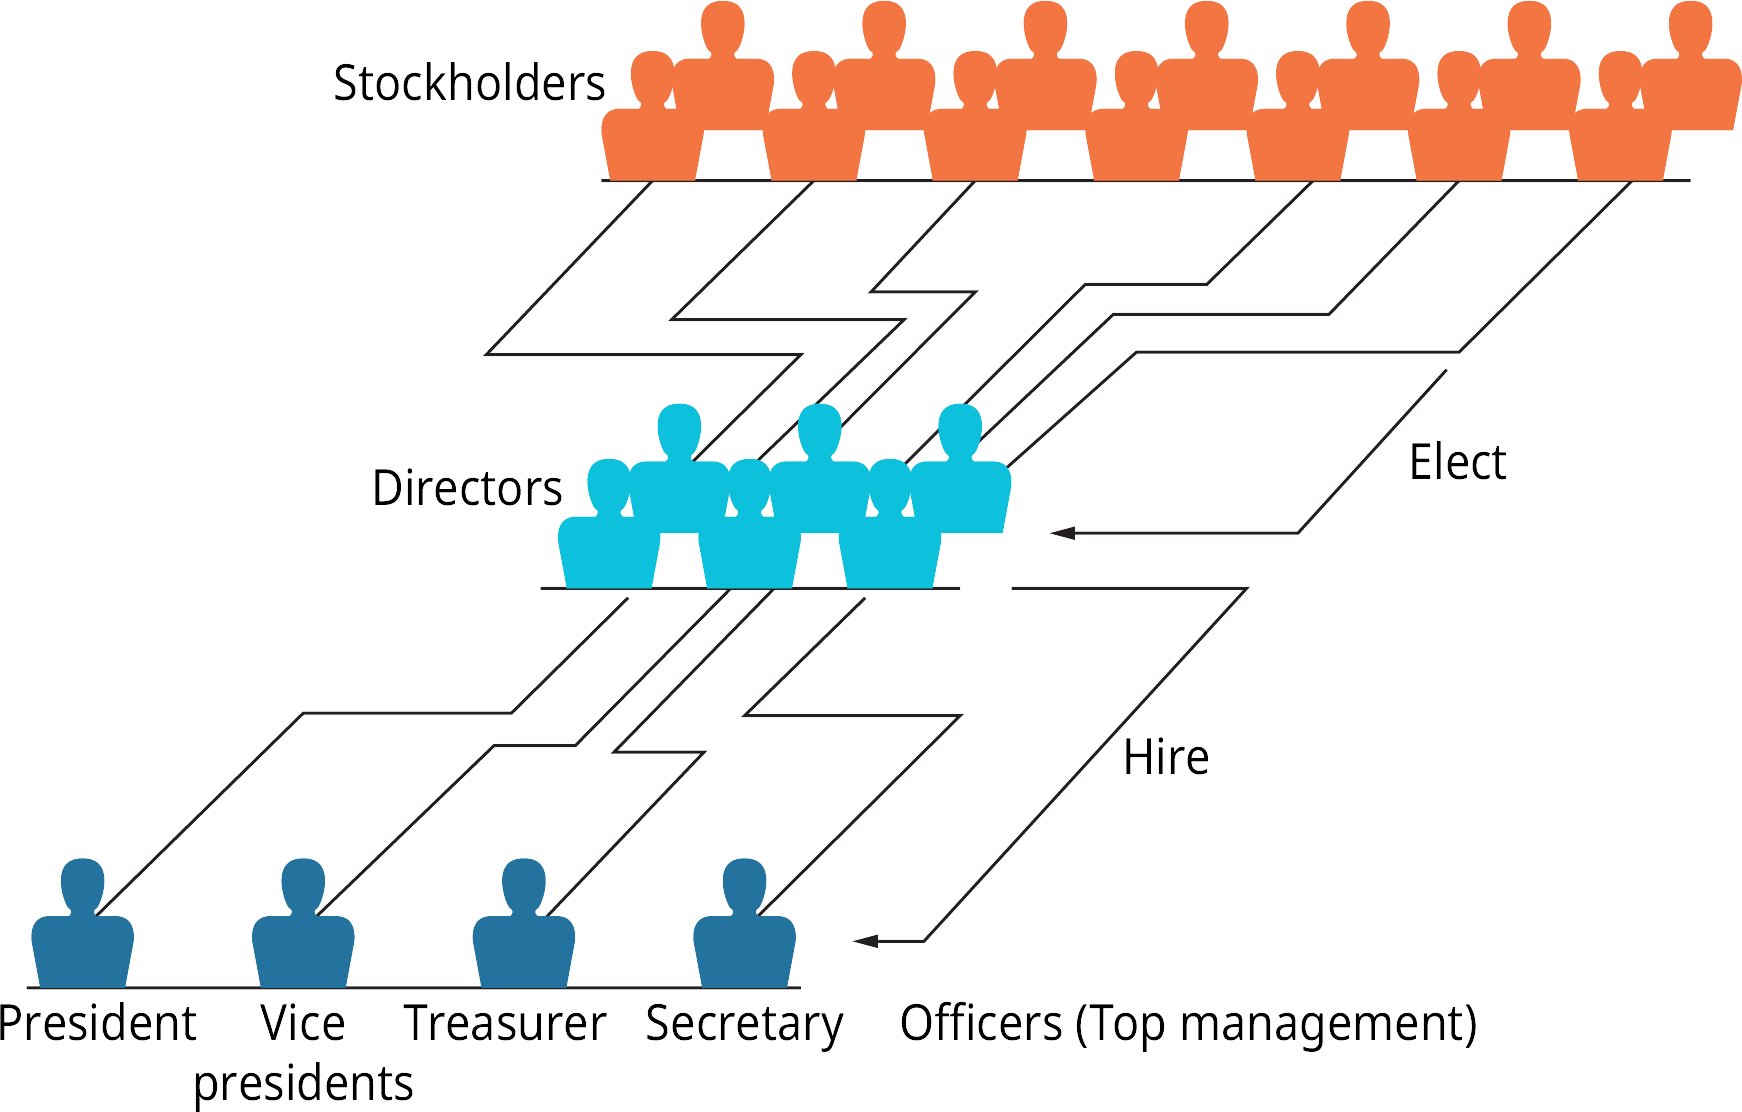 Exhibit 4.2 Organizational Structure of Corporations Attribution: Copyright Rice University, OpenStax, under CC BY-NC-SA 4.0 license